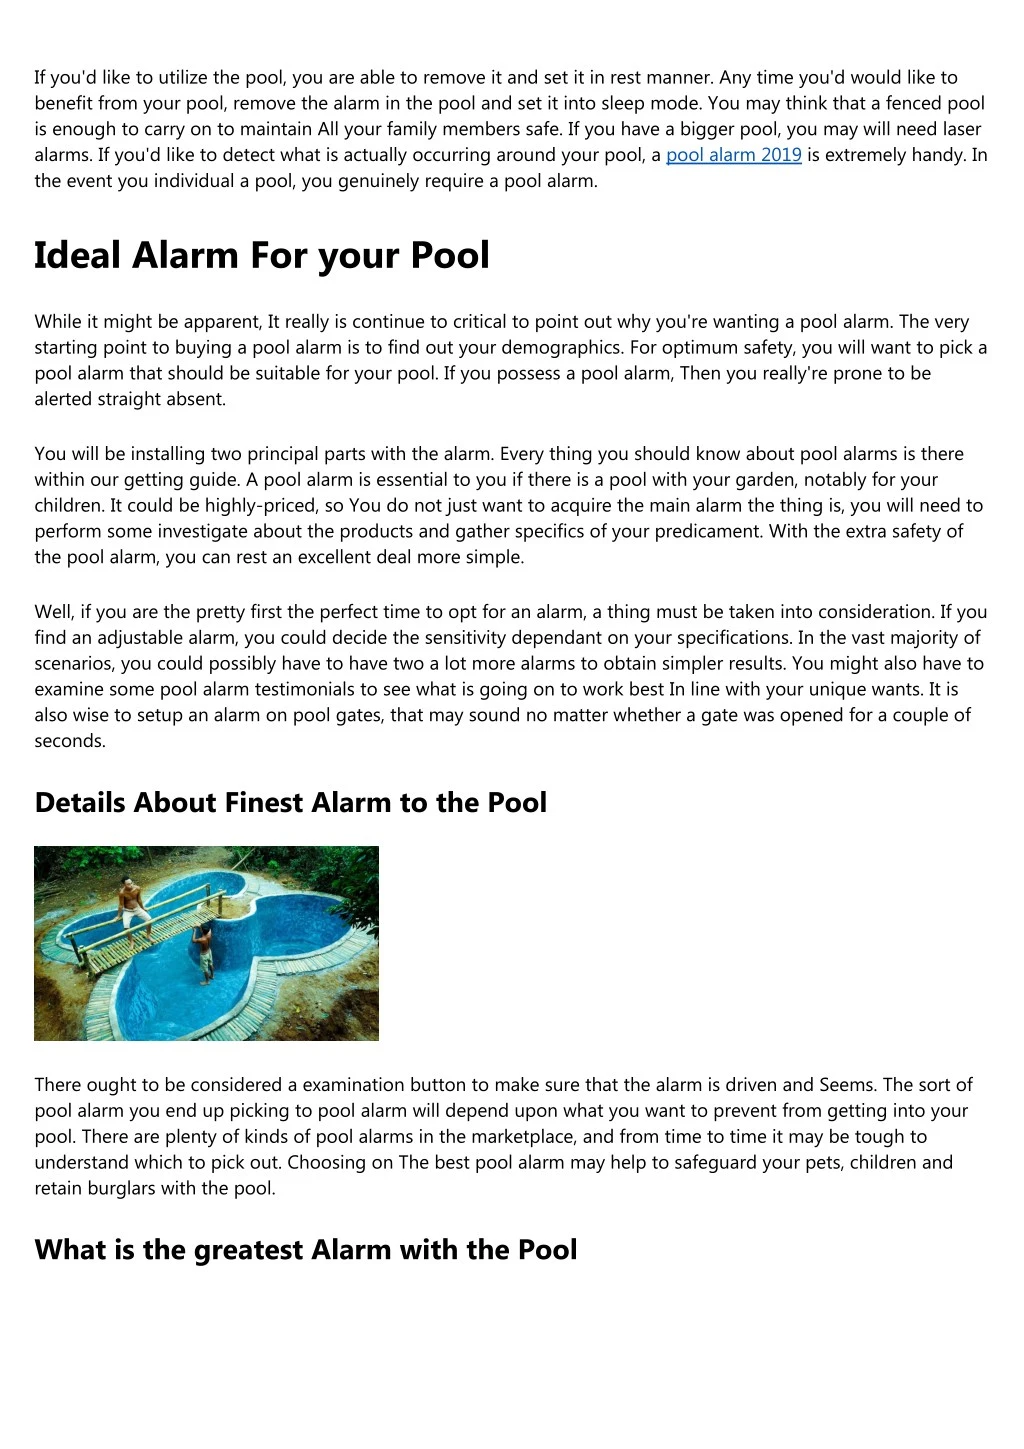 if you d like to utilize the pool you are able